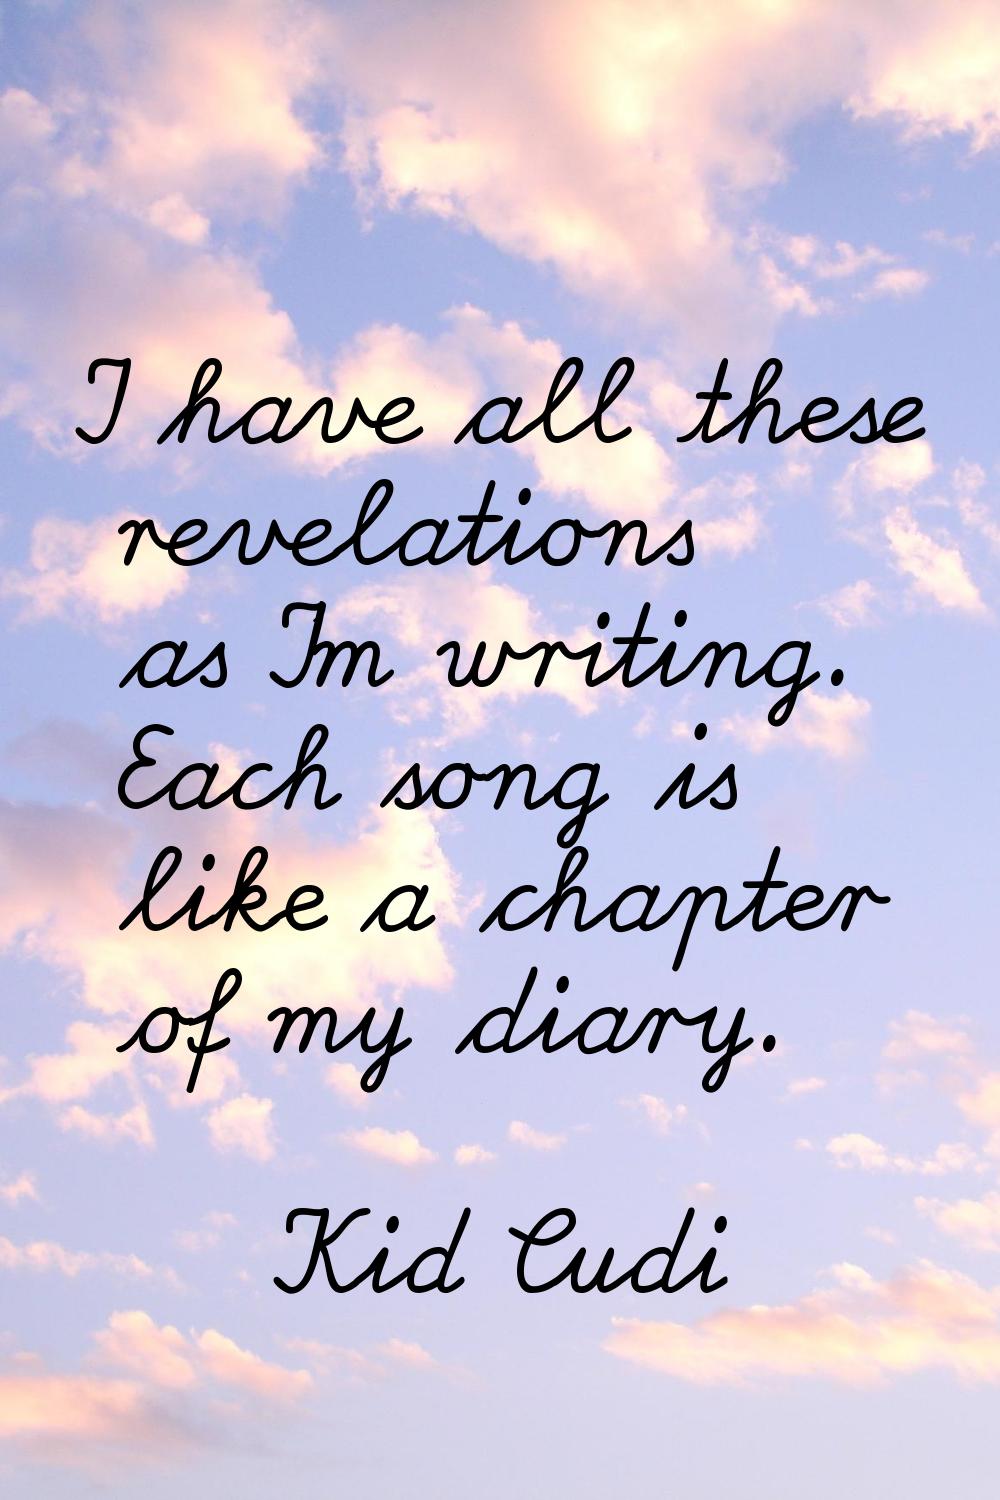 I have all these revelations as I'm writing. Each song is like a chapter of my diary.